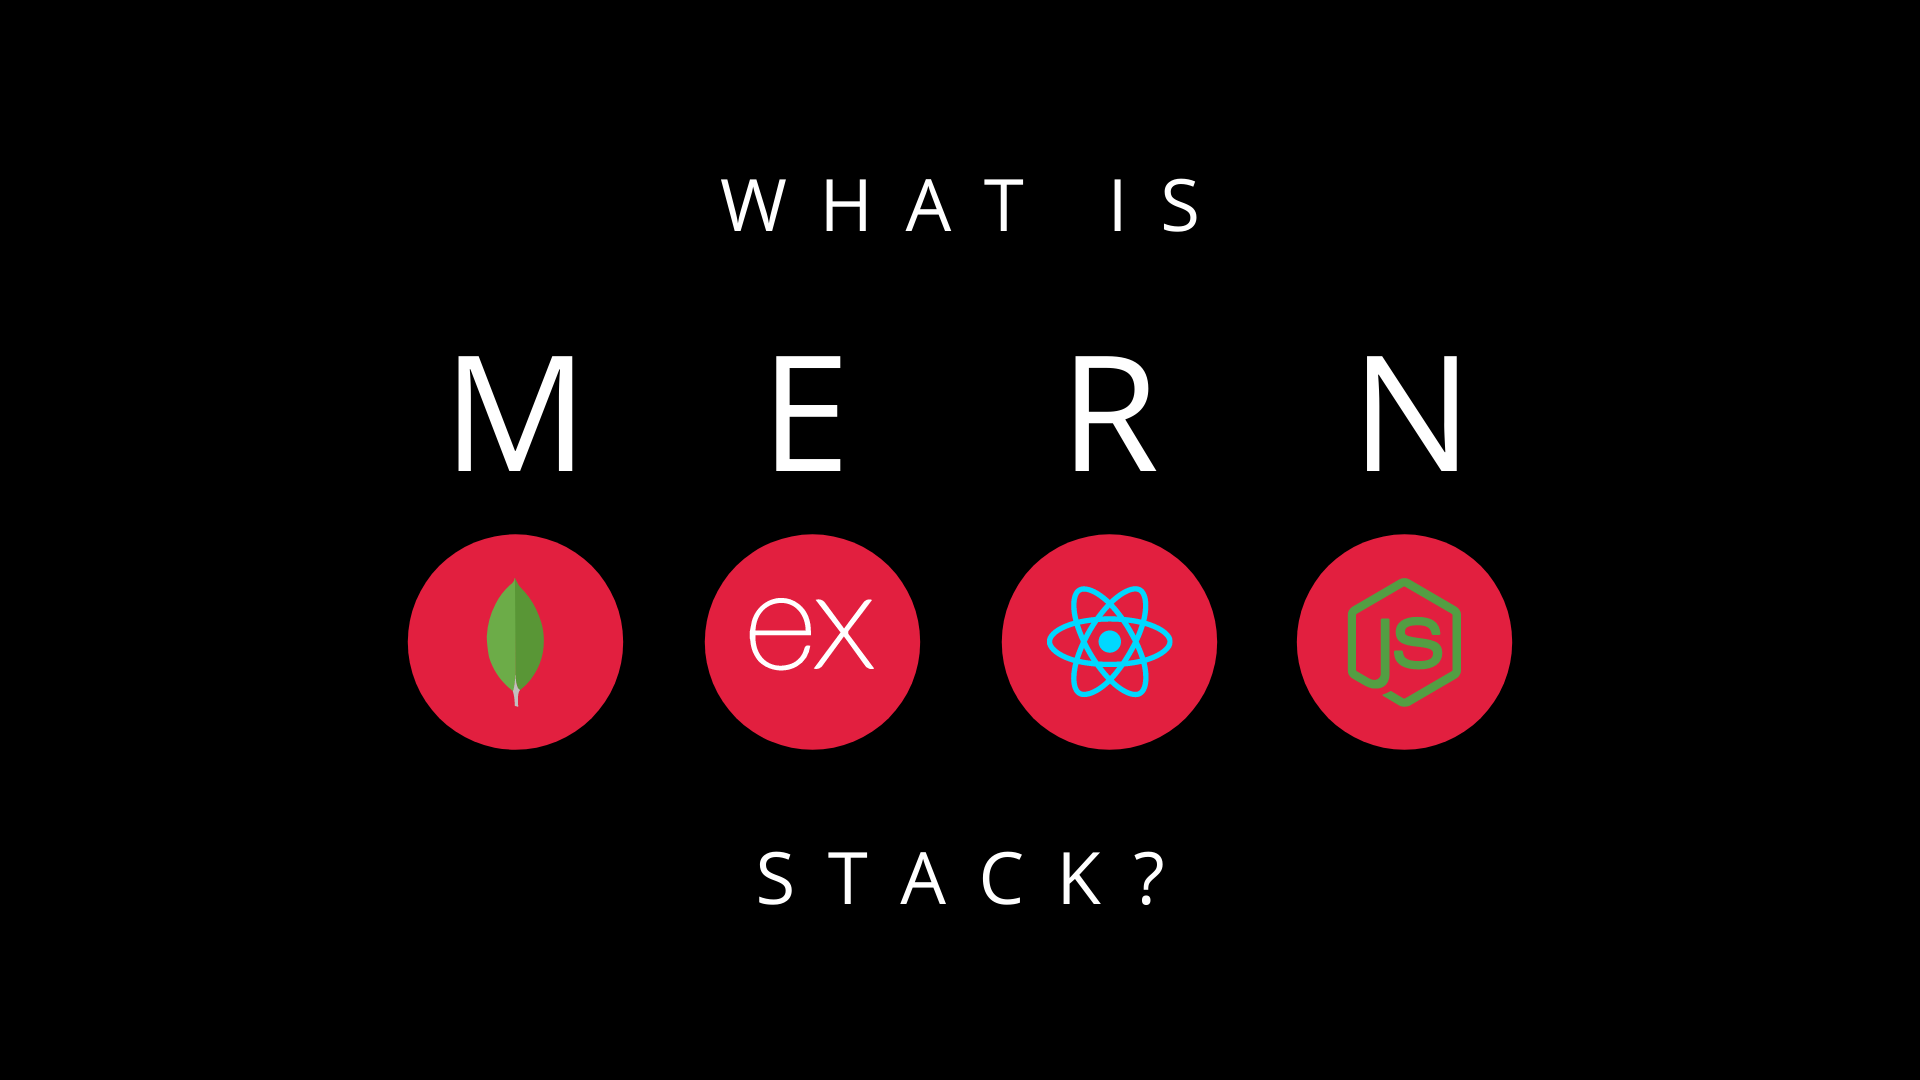 What is MERN stack?